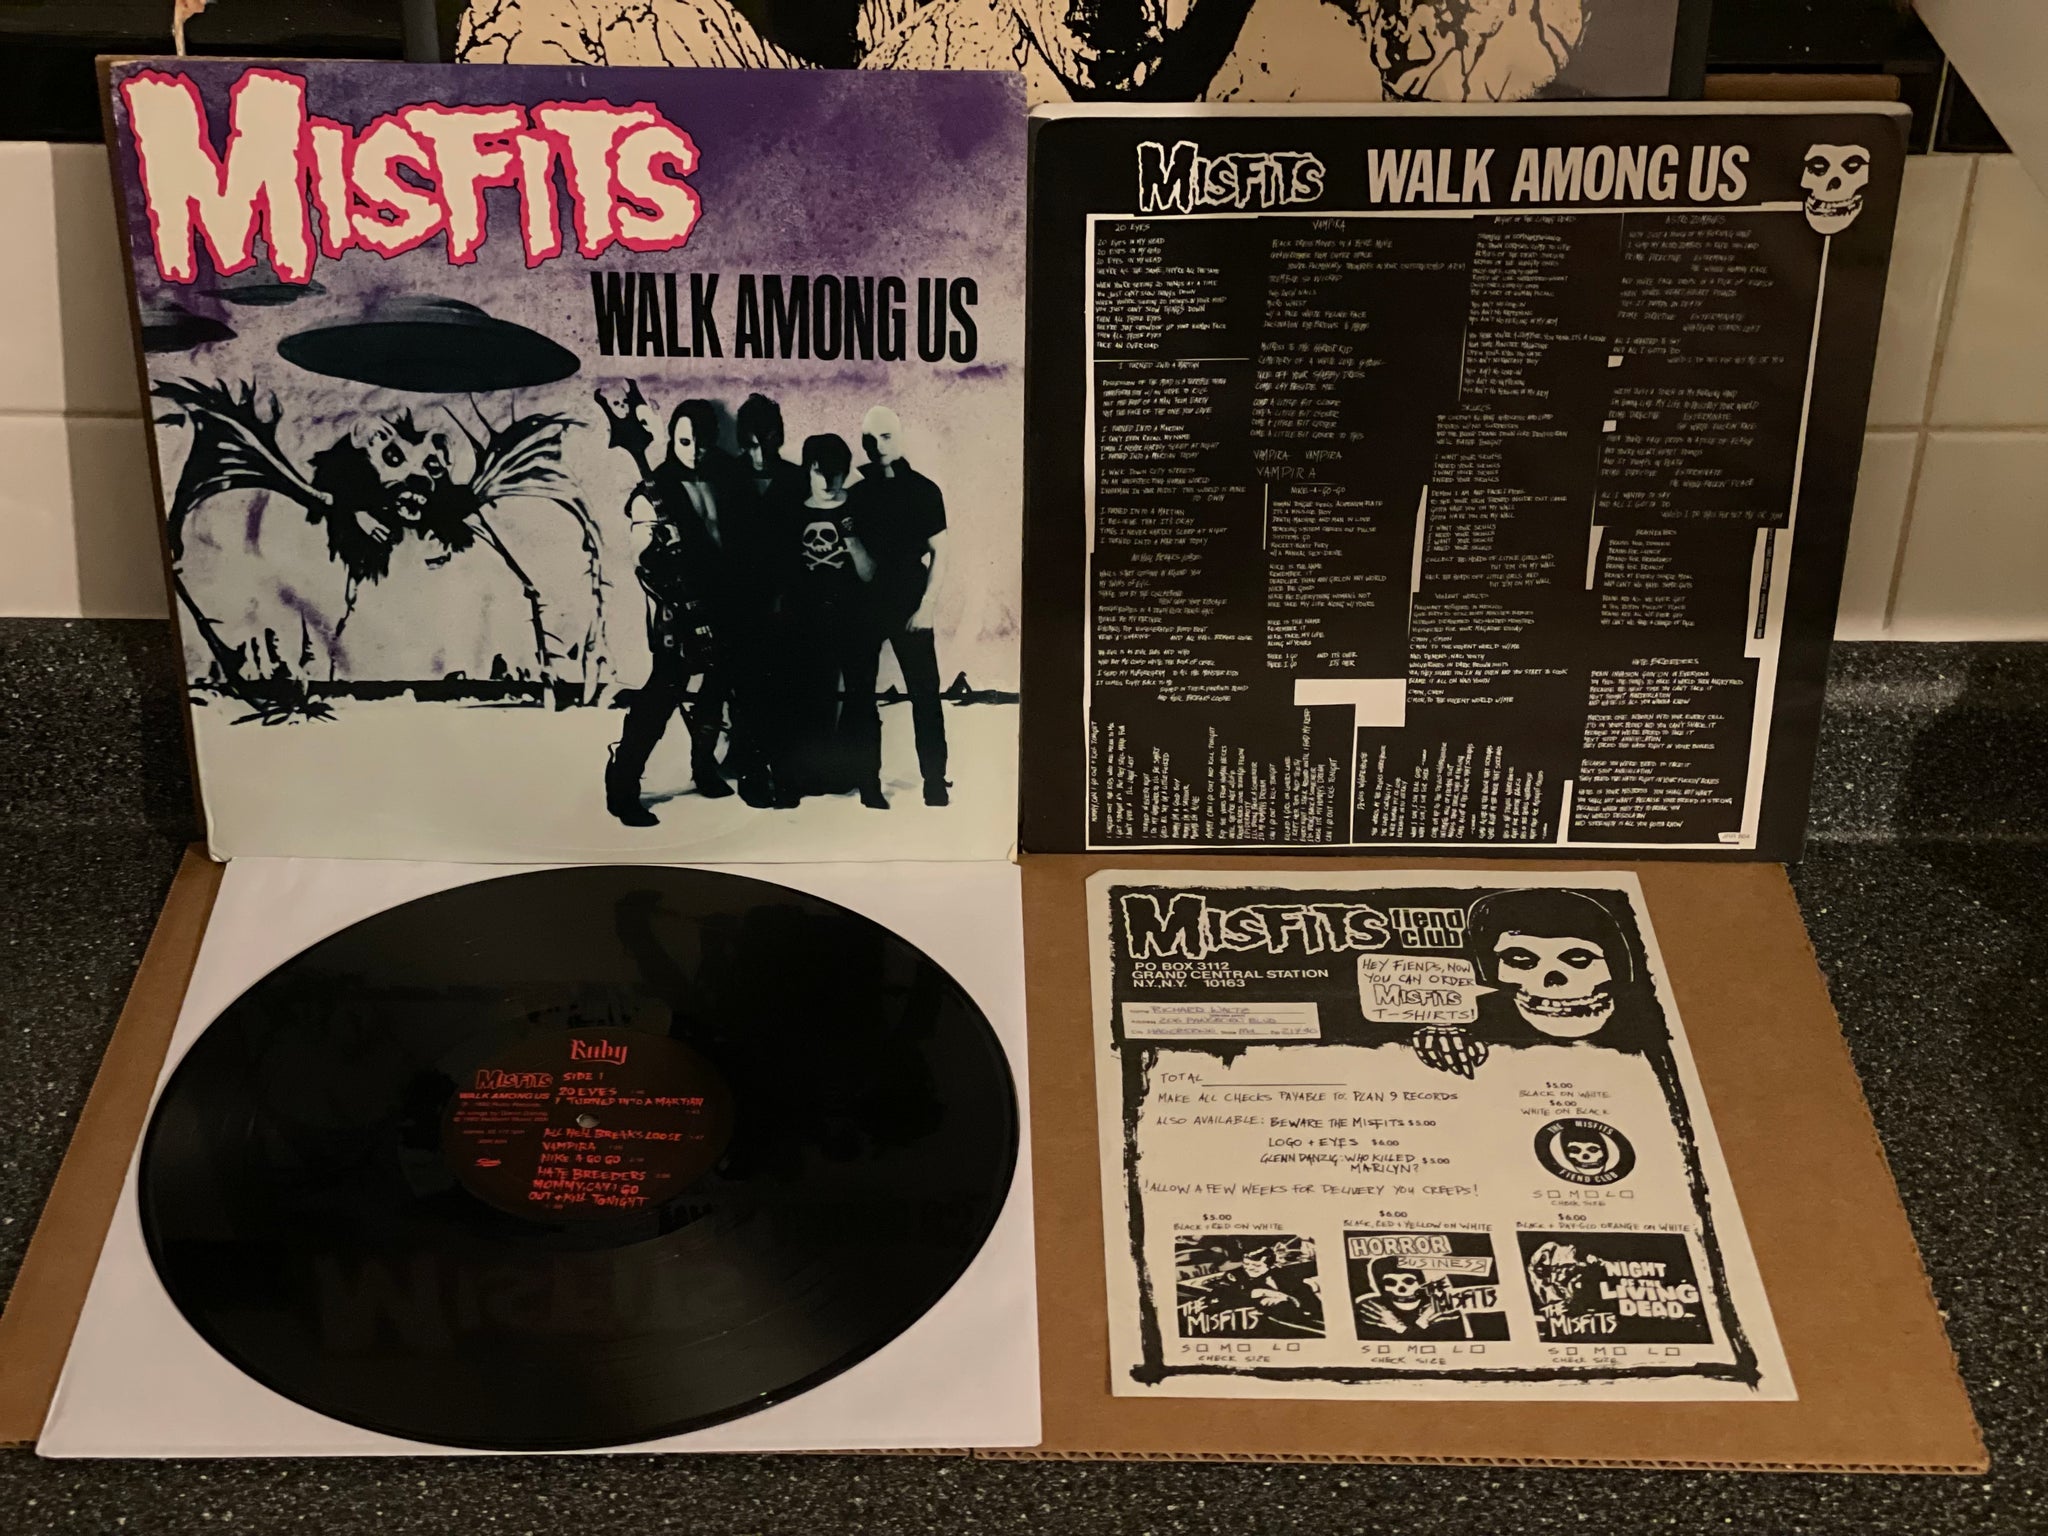 Misfits Walk Among Us Lp 1982 Ruby Records 2nd Cover Version Original The Record Space 